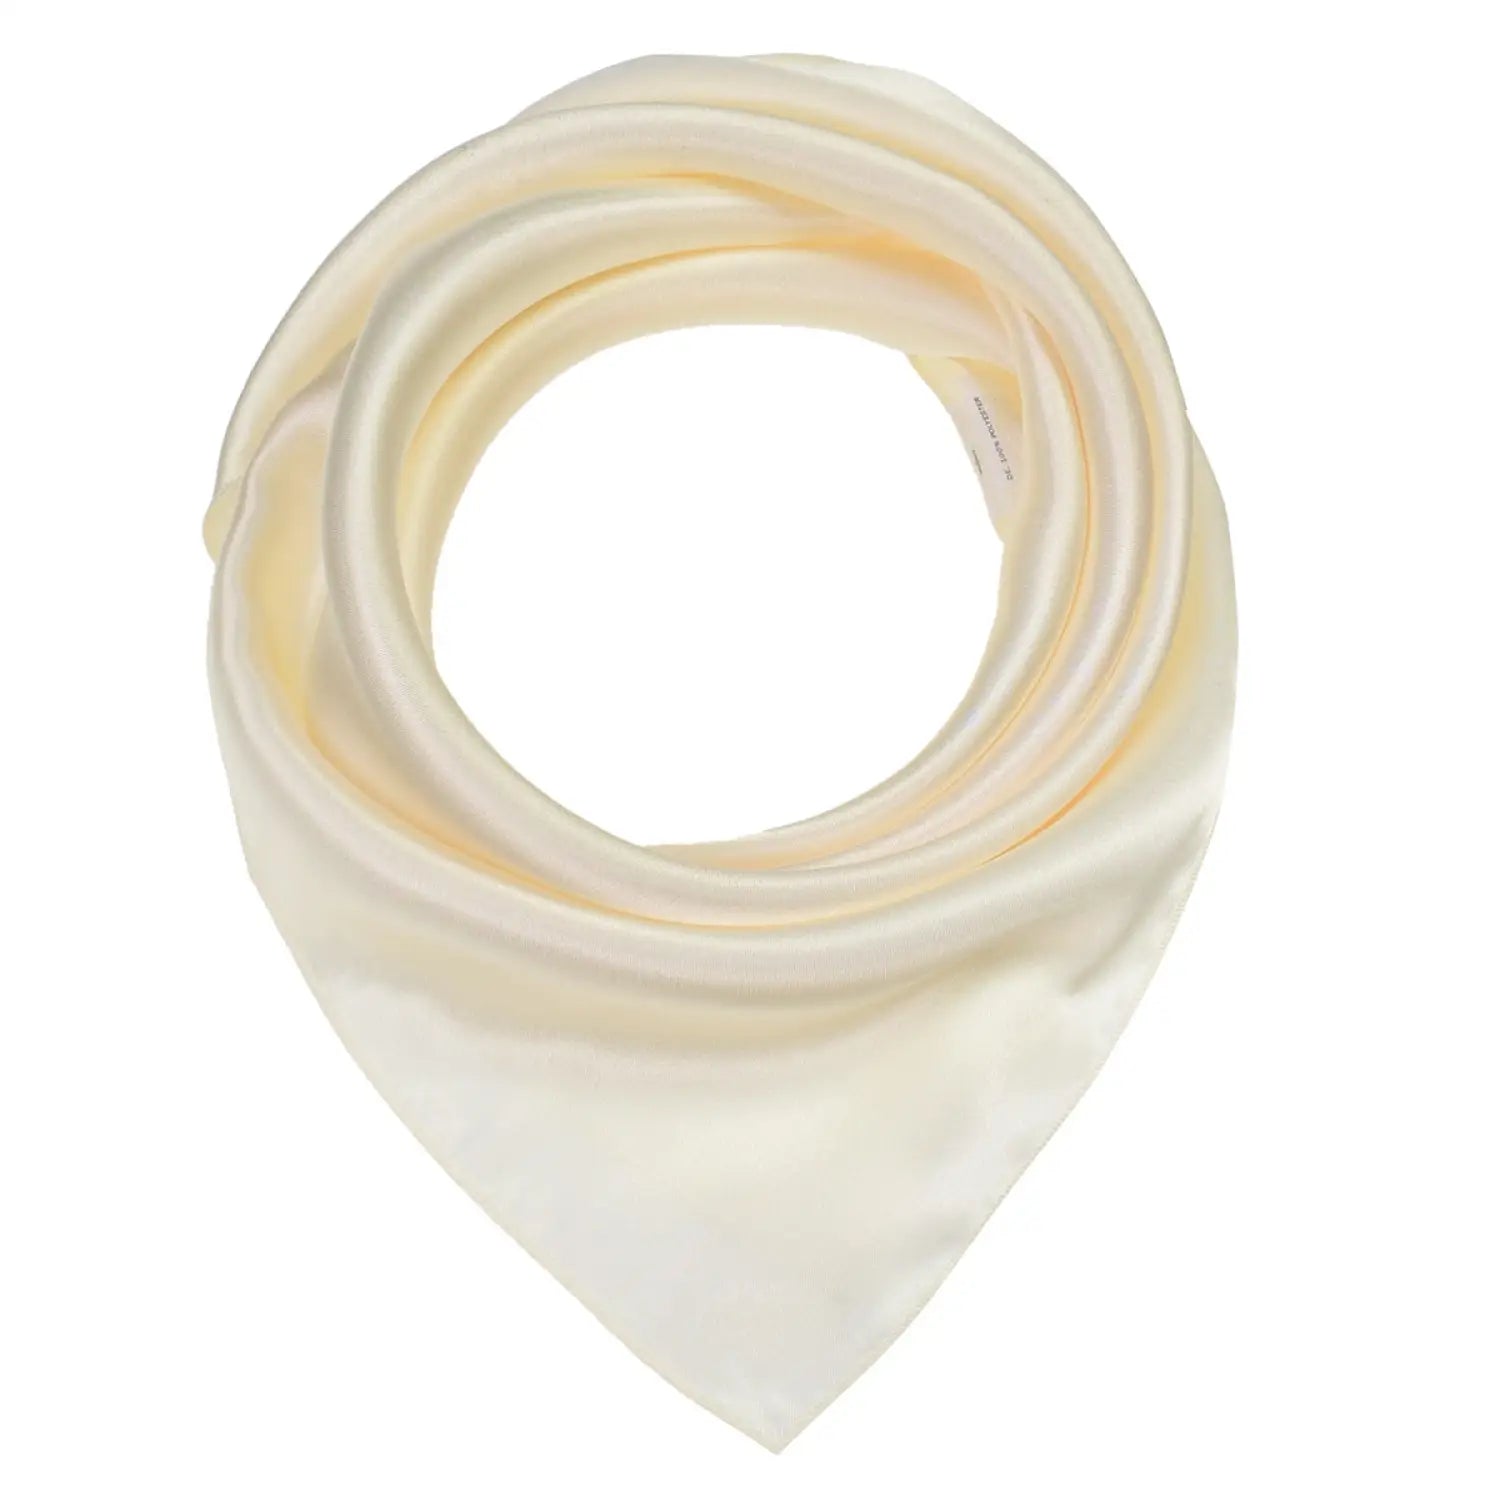 Silk satin square scarf with white and yellow design